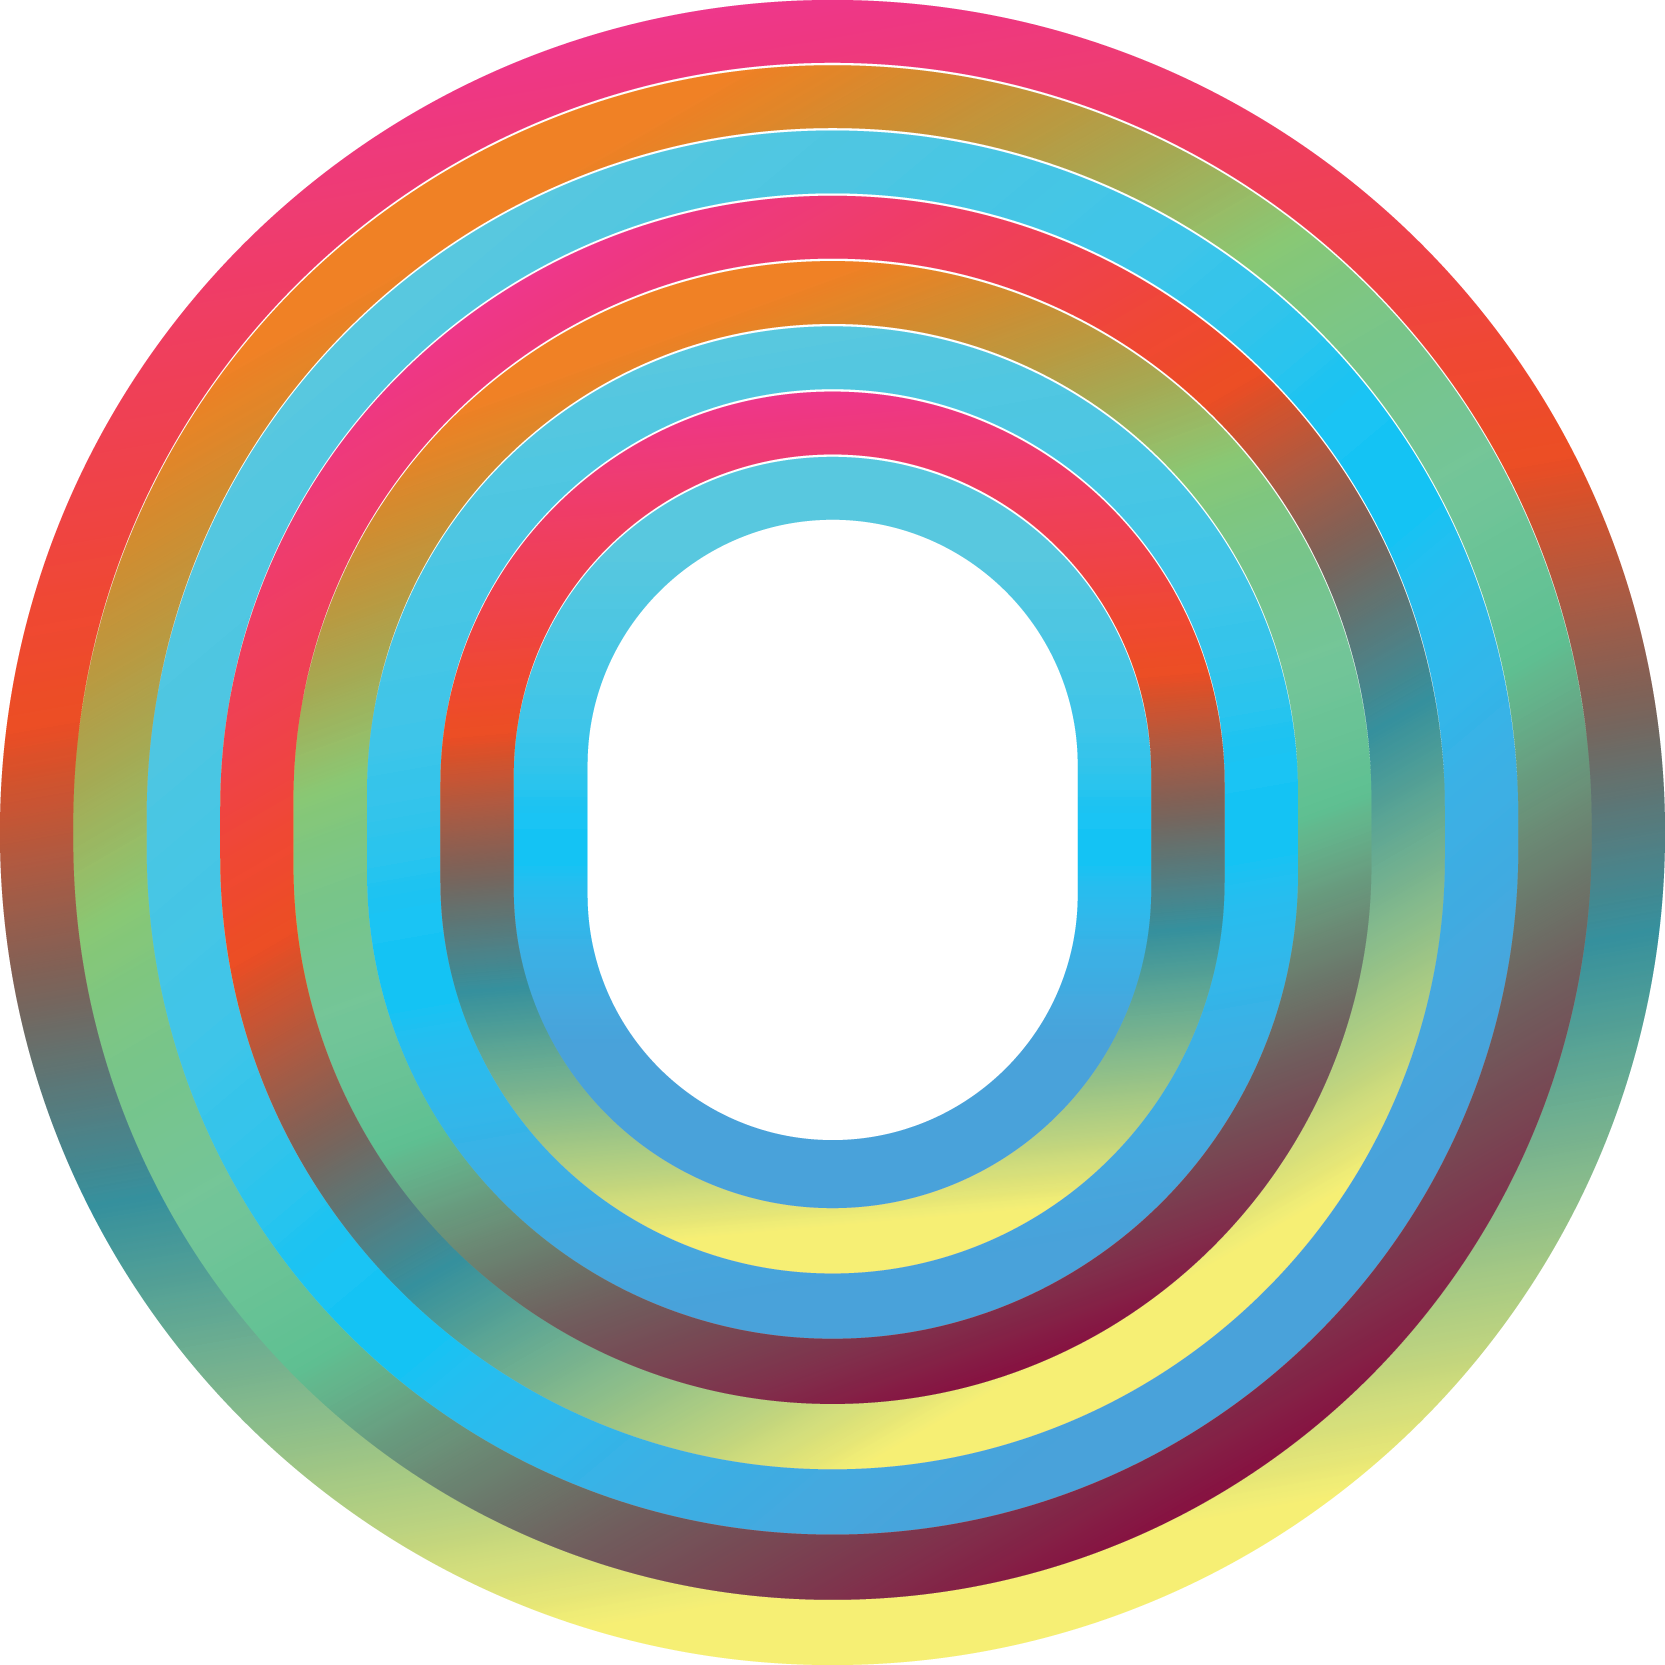 Multicoloured concentric oval shapes